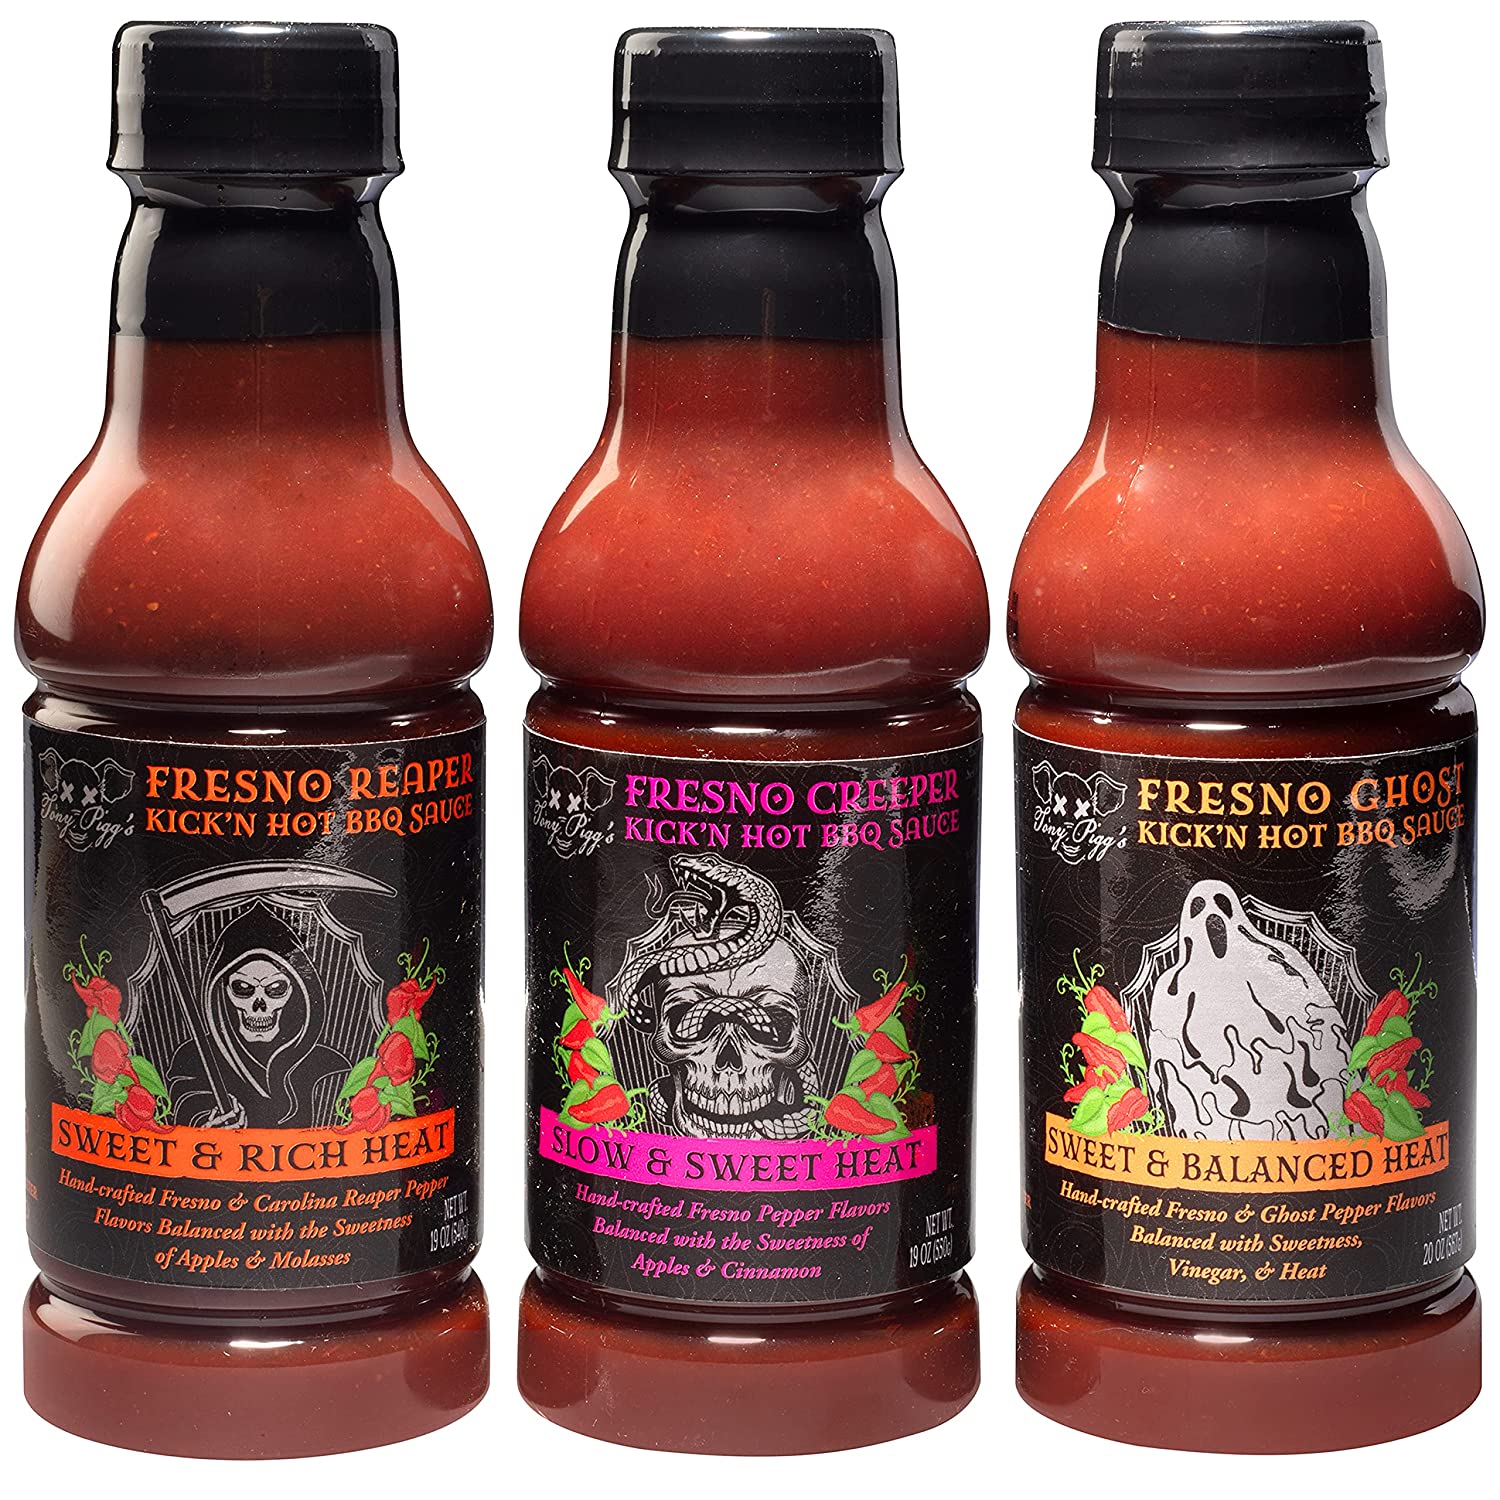 Tony Pigg's Kick'n Hot BBQ Sauce Gift Set - (3-19oz Bottles - Fresno Reaper, Ghost, Creeper Flavors) - Hand-Crafted Spicy Barbecue Sauce made w real hot peppers and Nothing Artificial - image 1 of 5